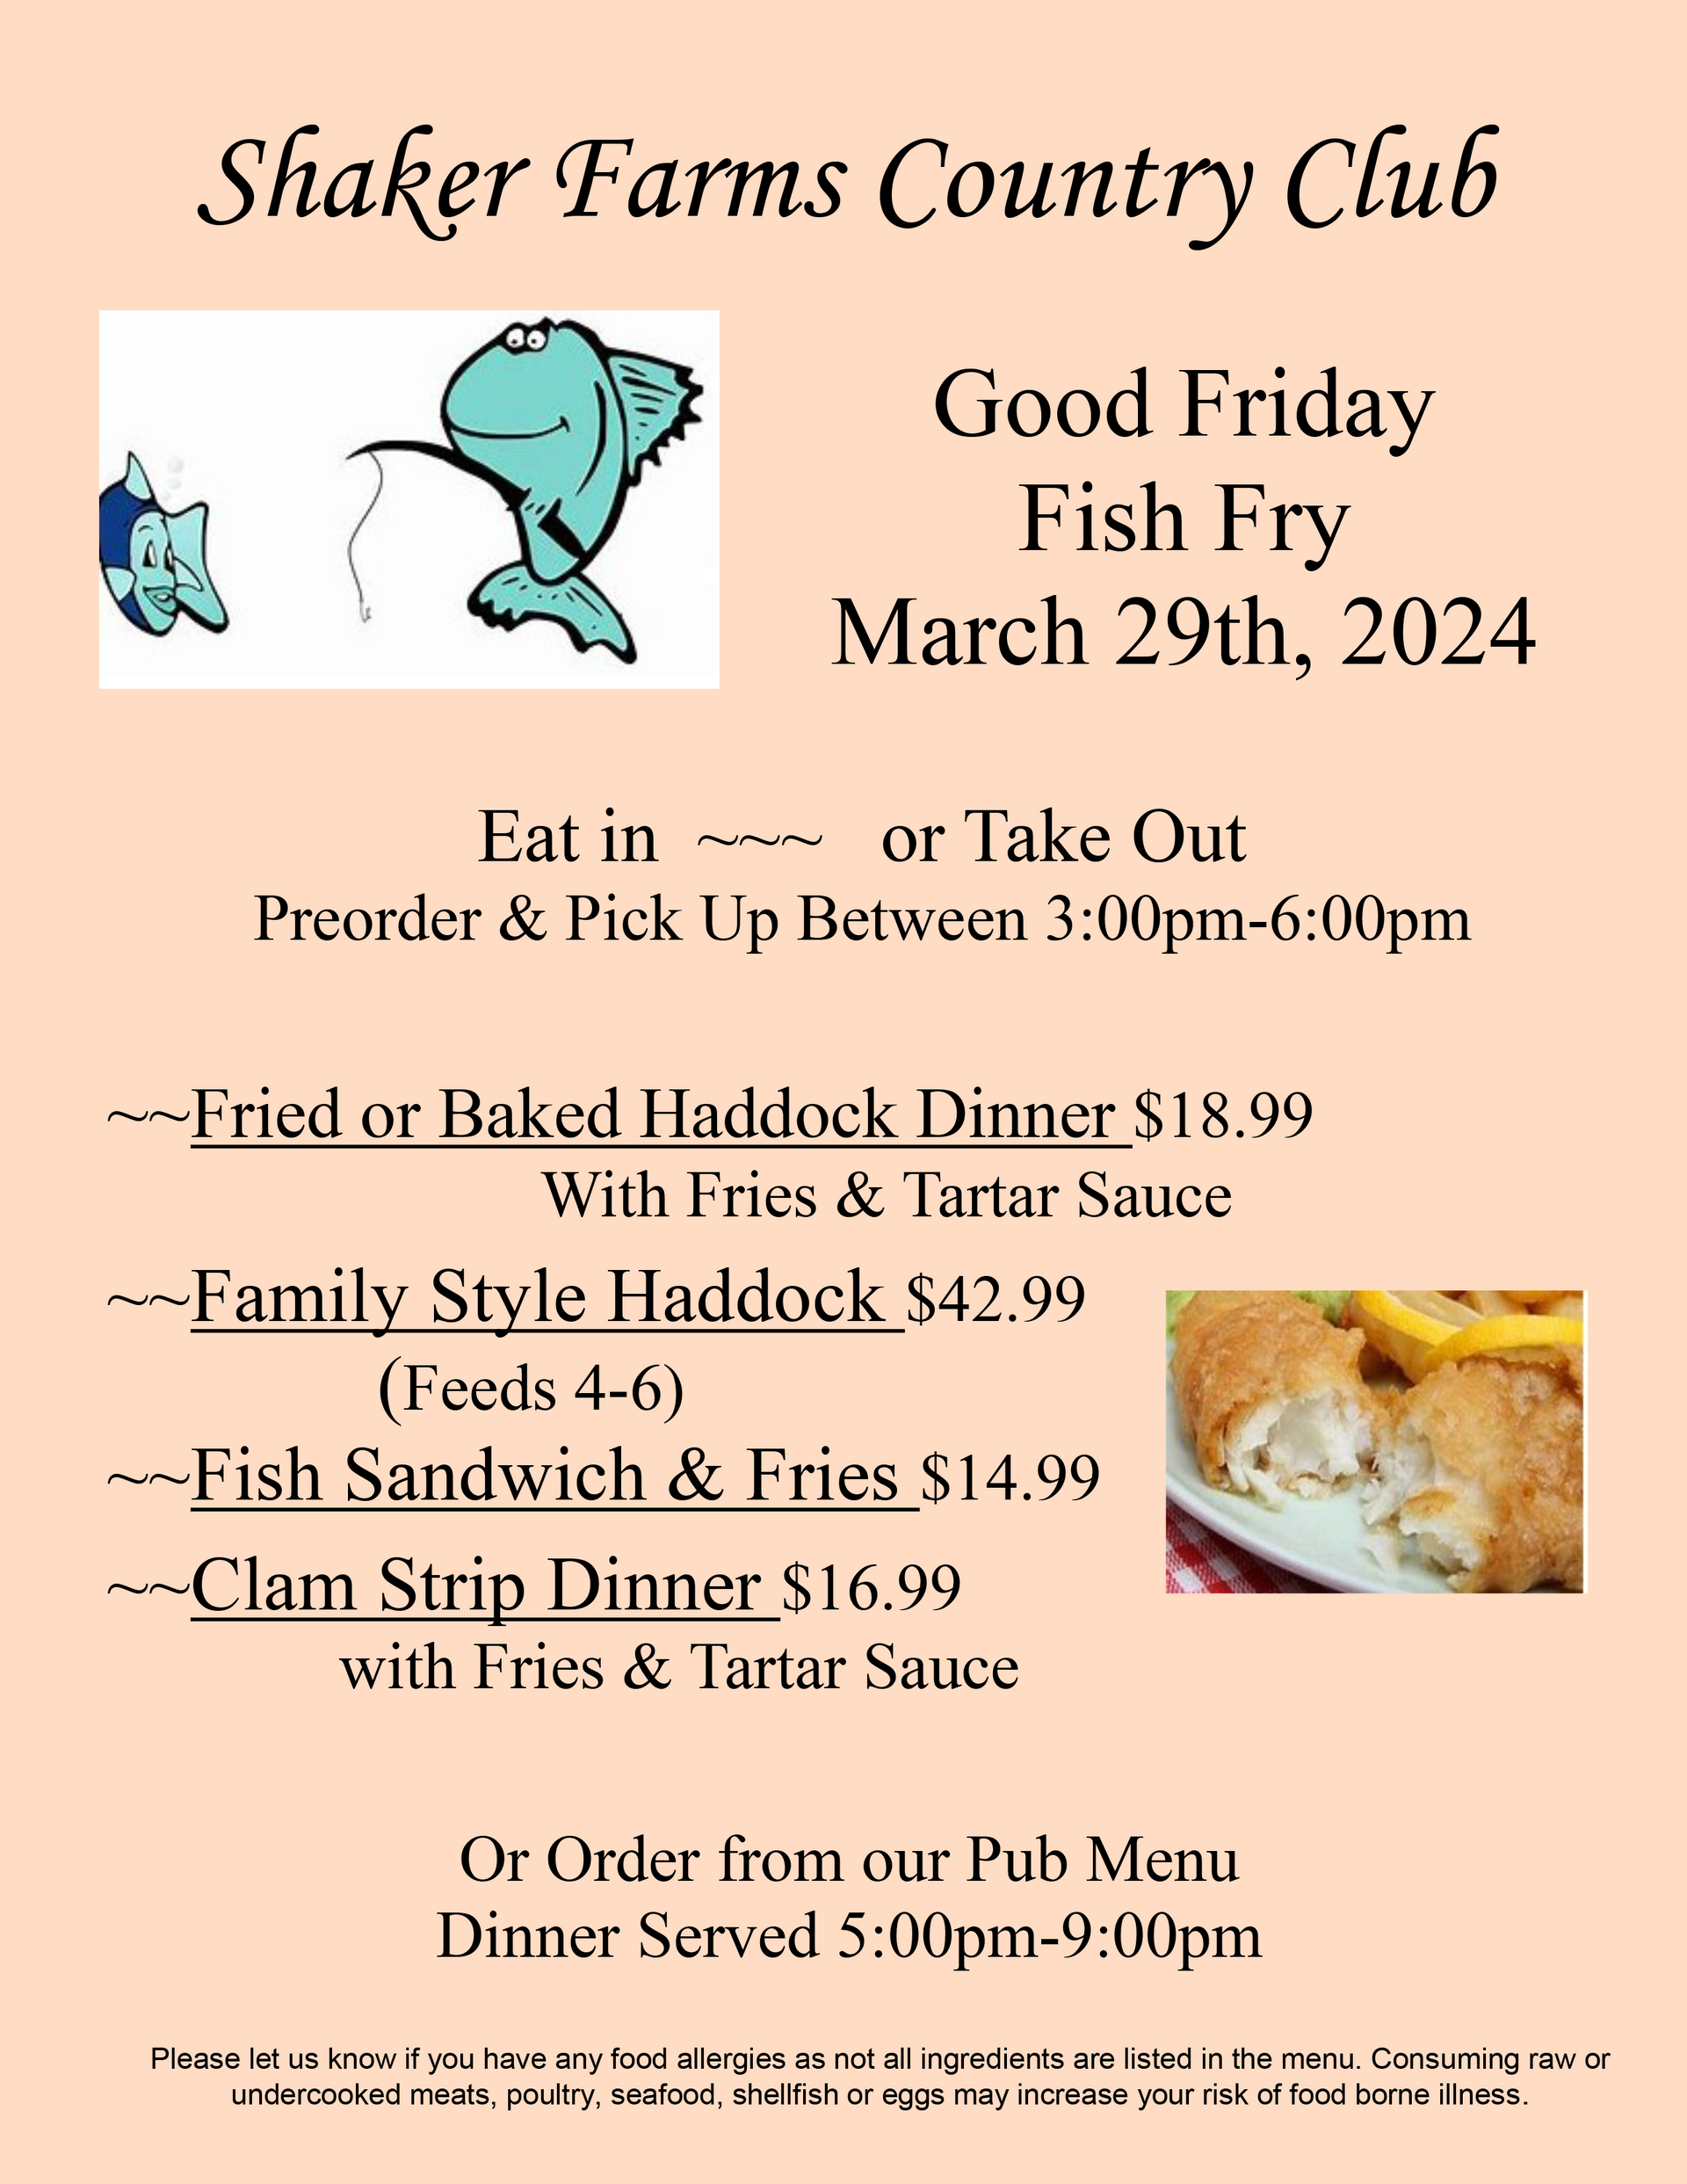 A poster for Shaker Farms Country Club advertises a Good Friday fish fry